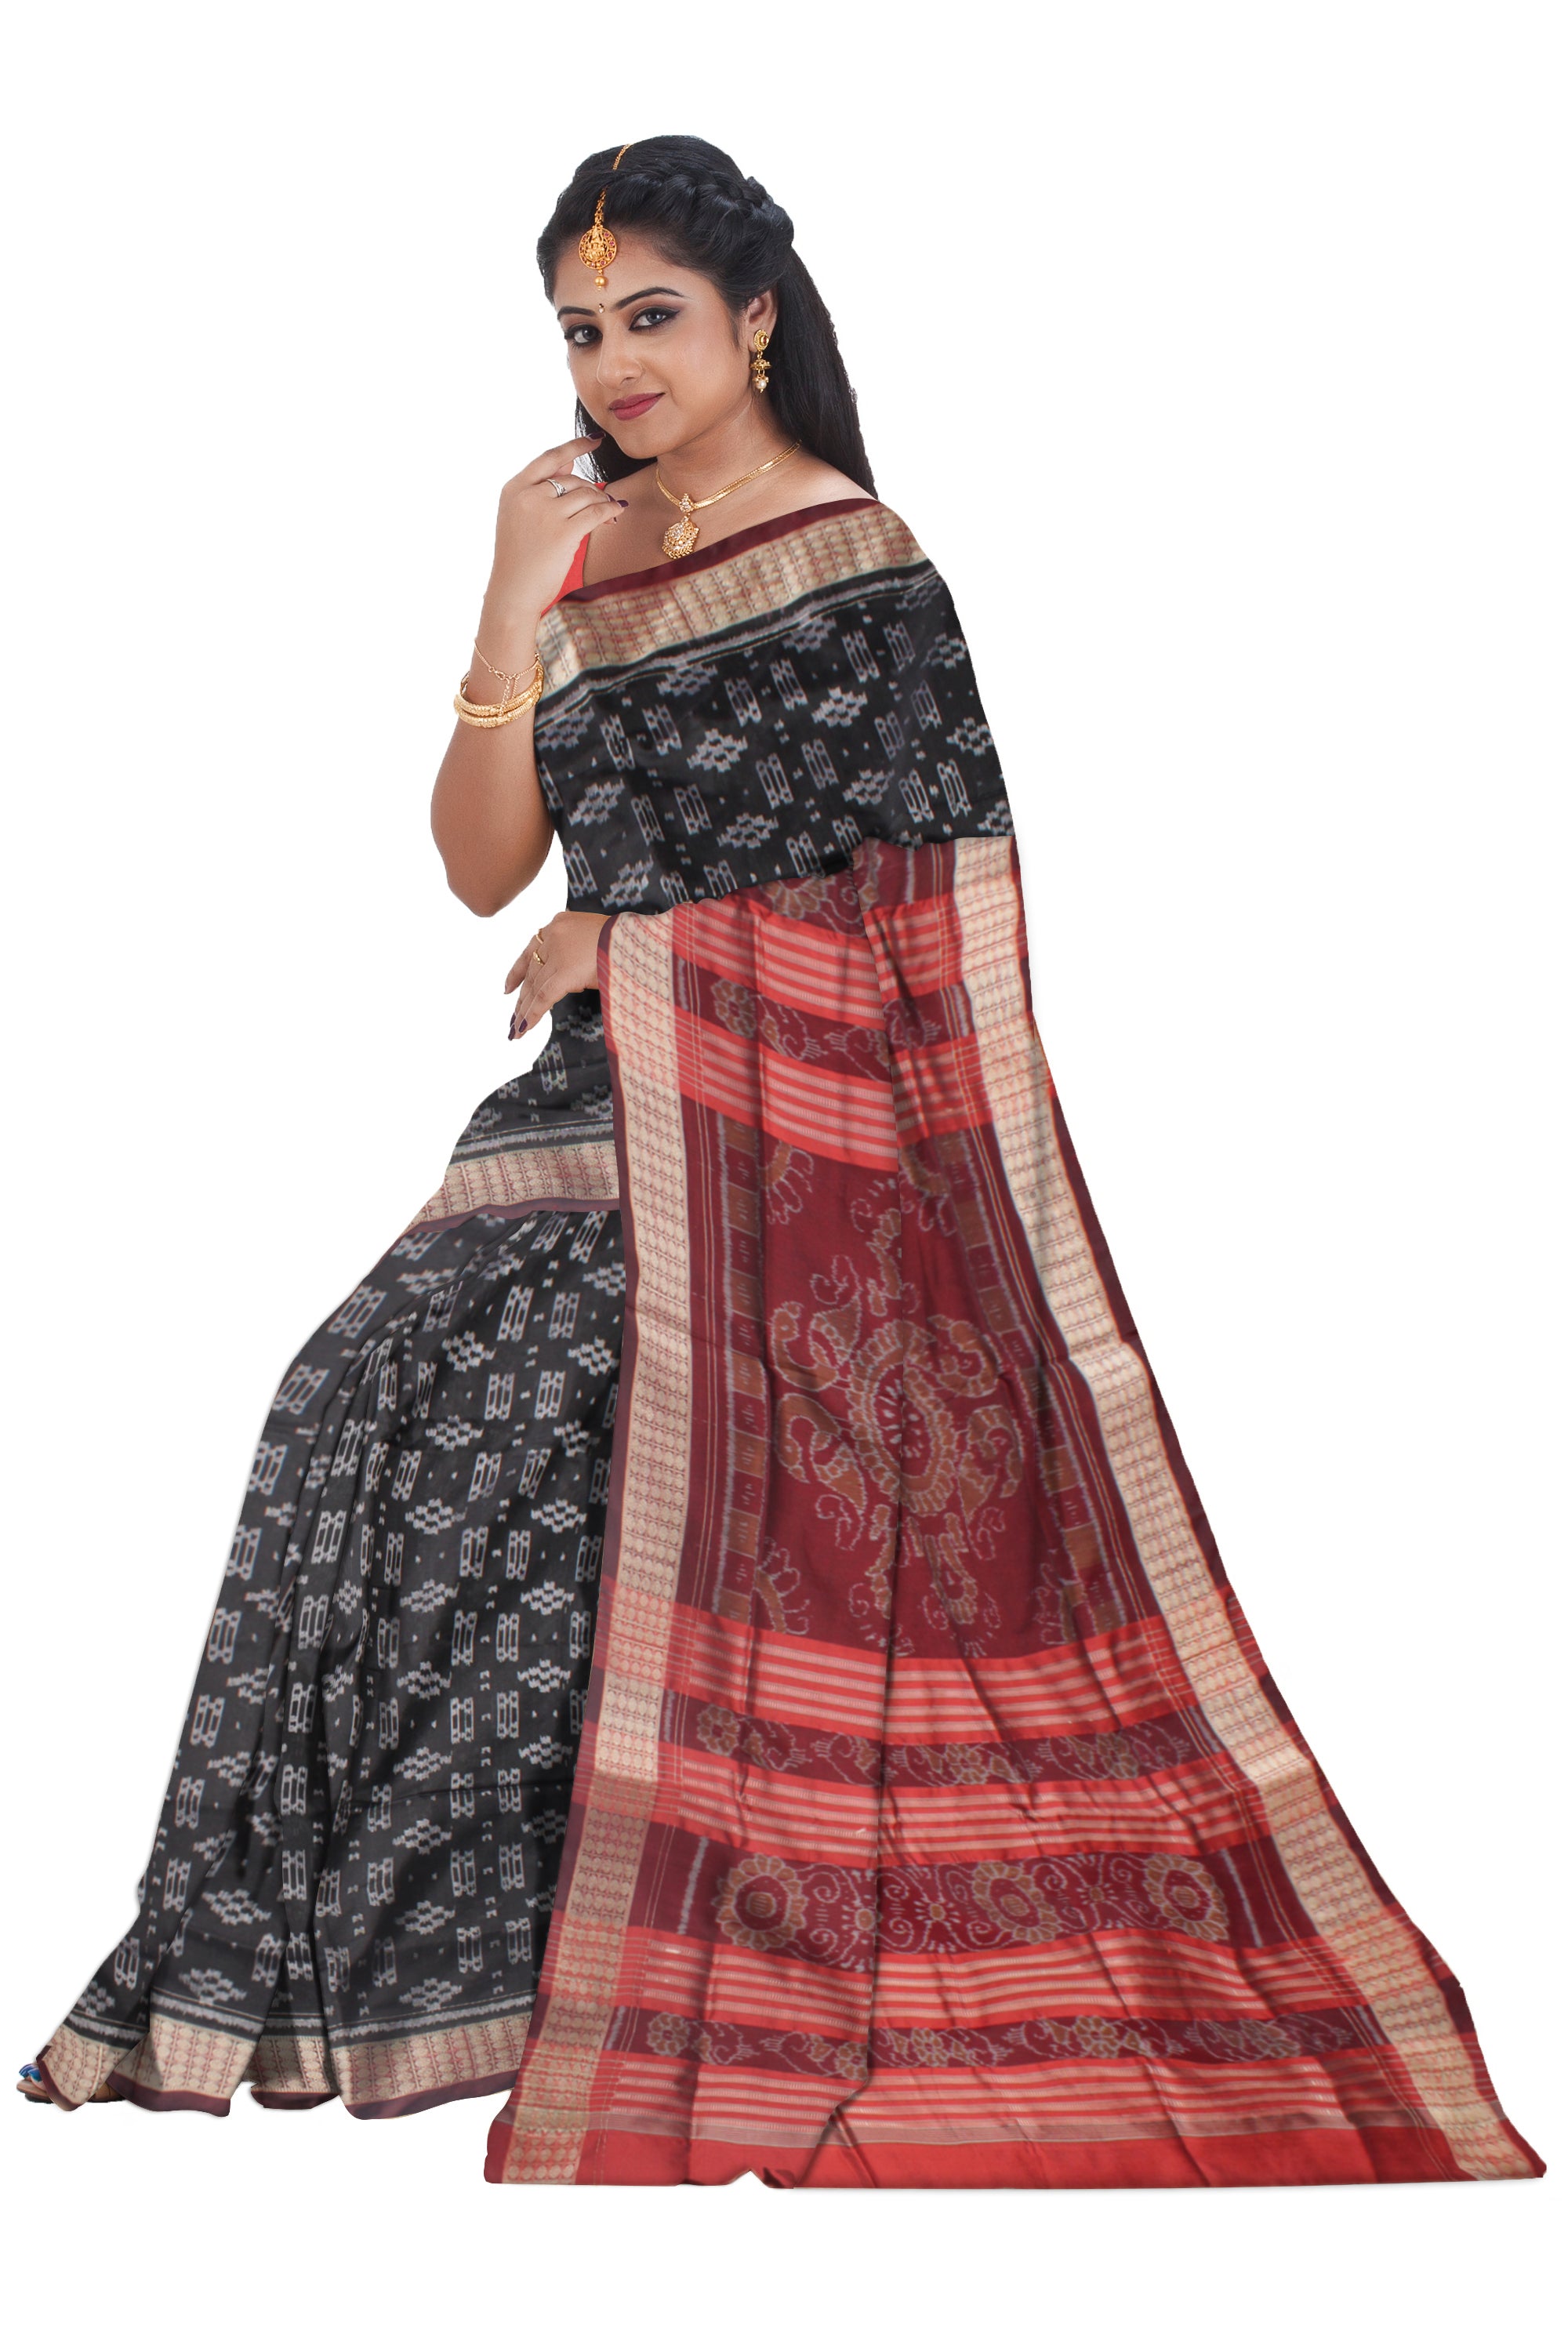 TRADITIONAL FULL BODY PASAPALI DESIGN PATA SAREE IS BLACK AND MAROON COLOR BASE,WITH MATCHING BLOUSE PIECE. - Koshali Arts & Crafts Enterprise